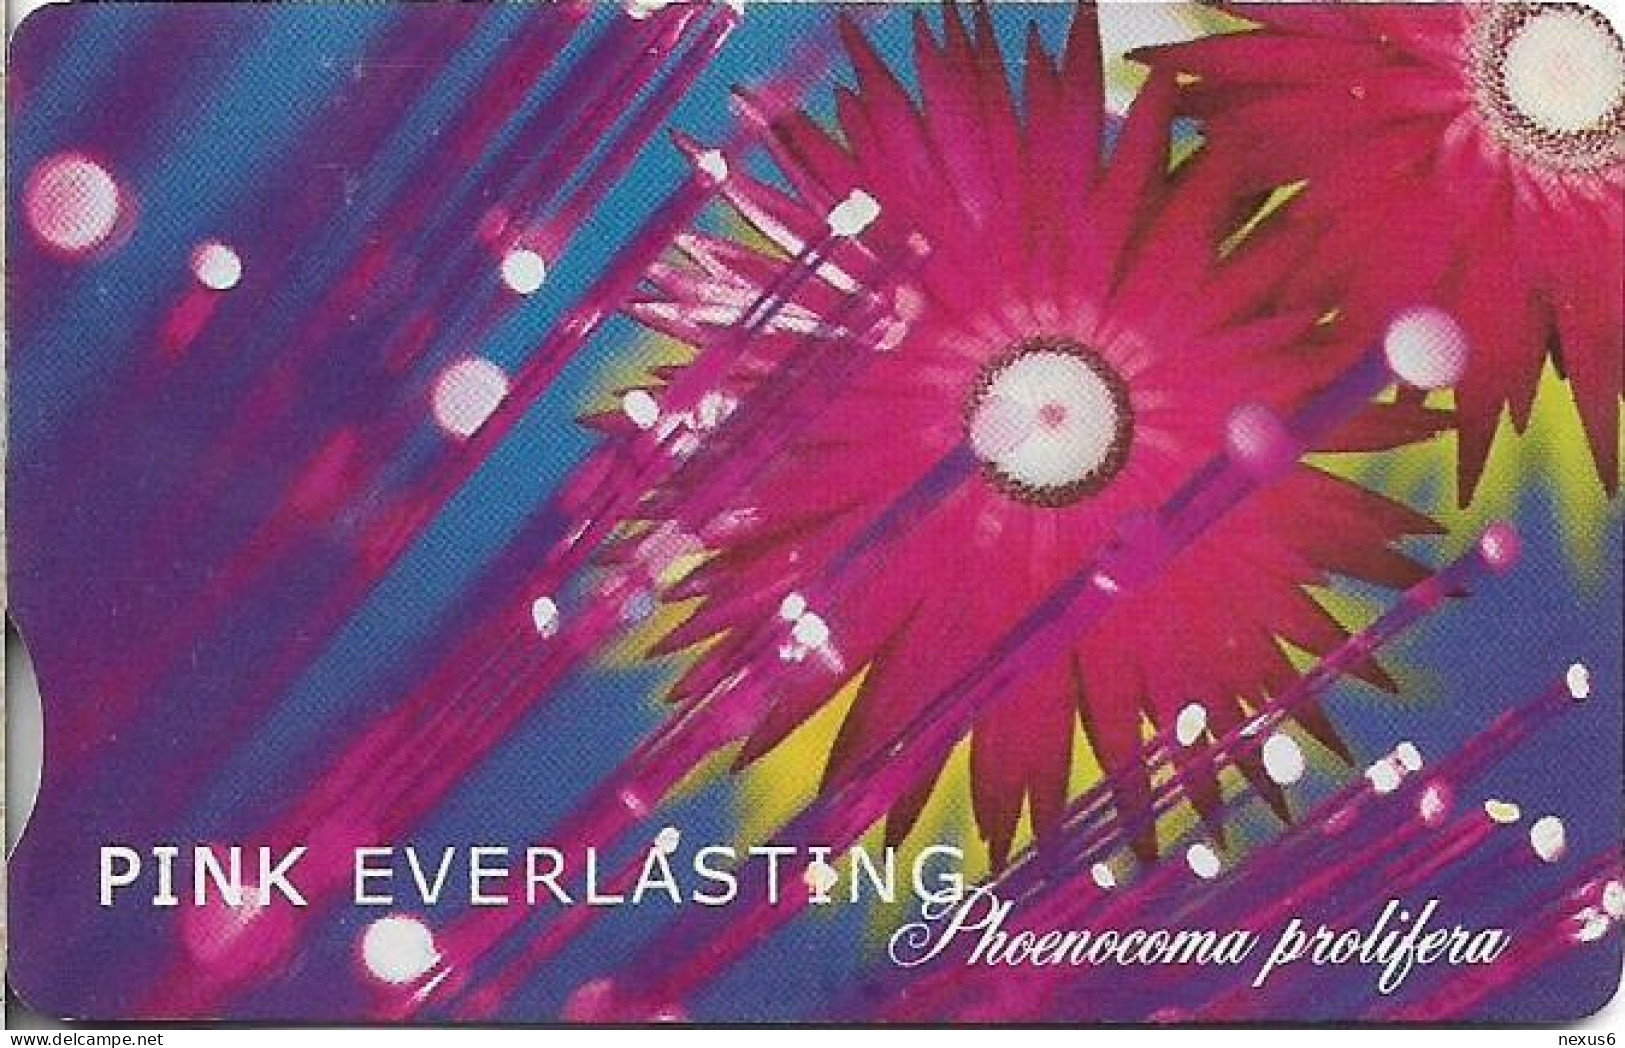 S. Africa - Telkom - Pink Everlasting (With Notch), Exp. 04.2001, Chip SO3, 100R, 20.000ex, Used - Afrique Du Sud